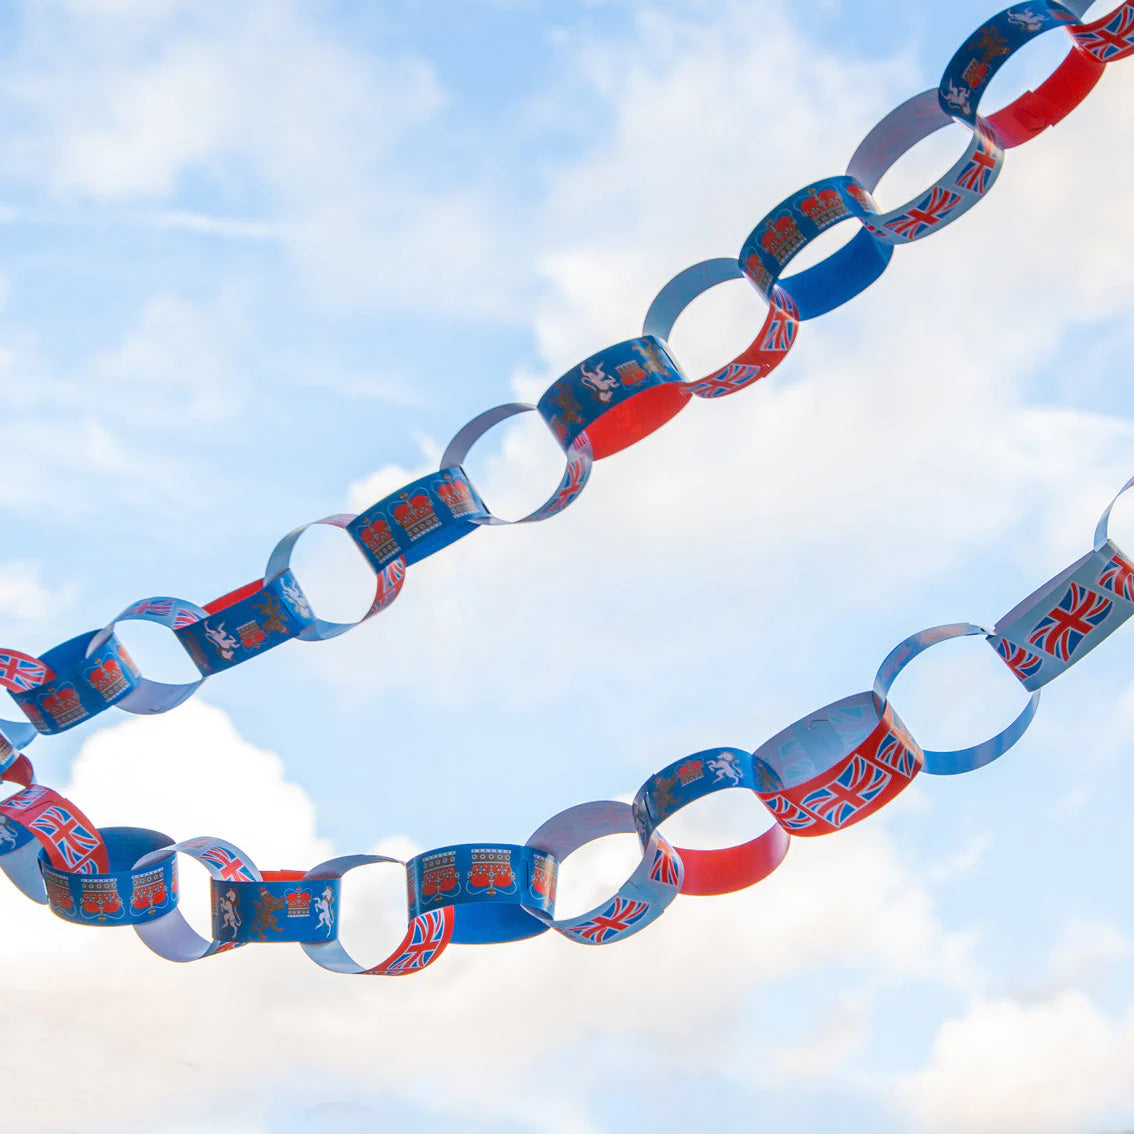 Patriotic Red, White and Blue Paper Chain Kit - 100 Pack